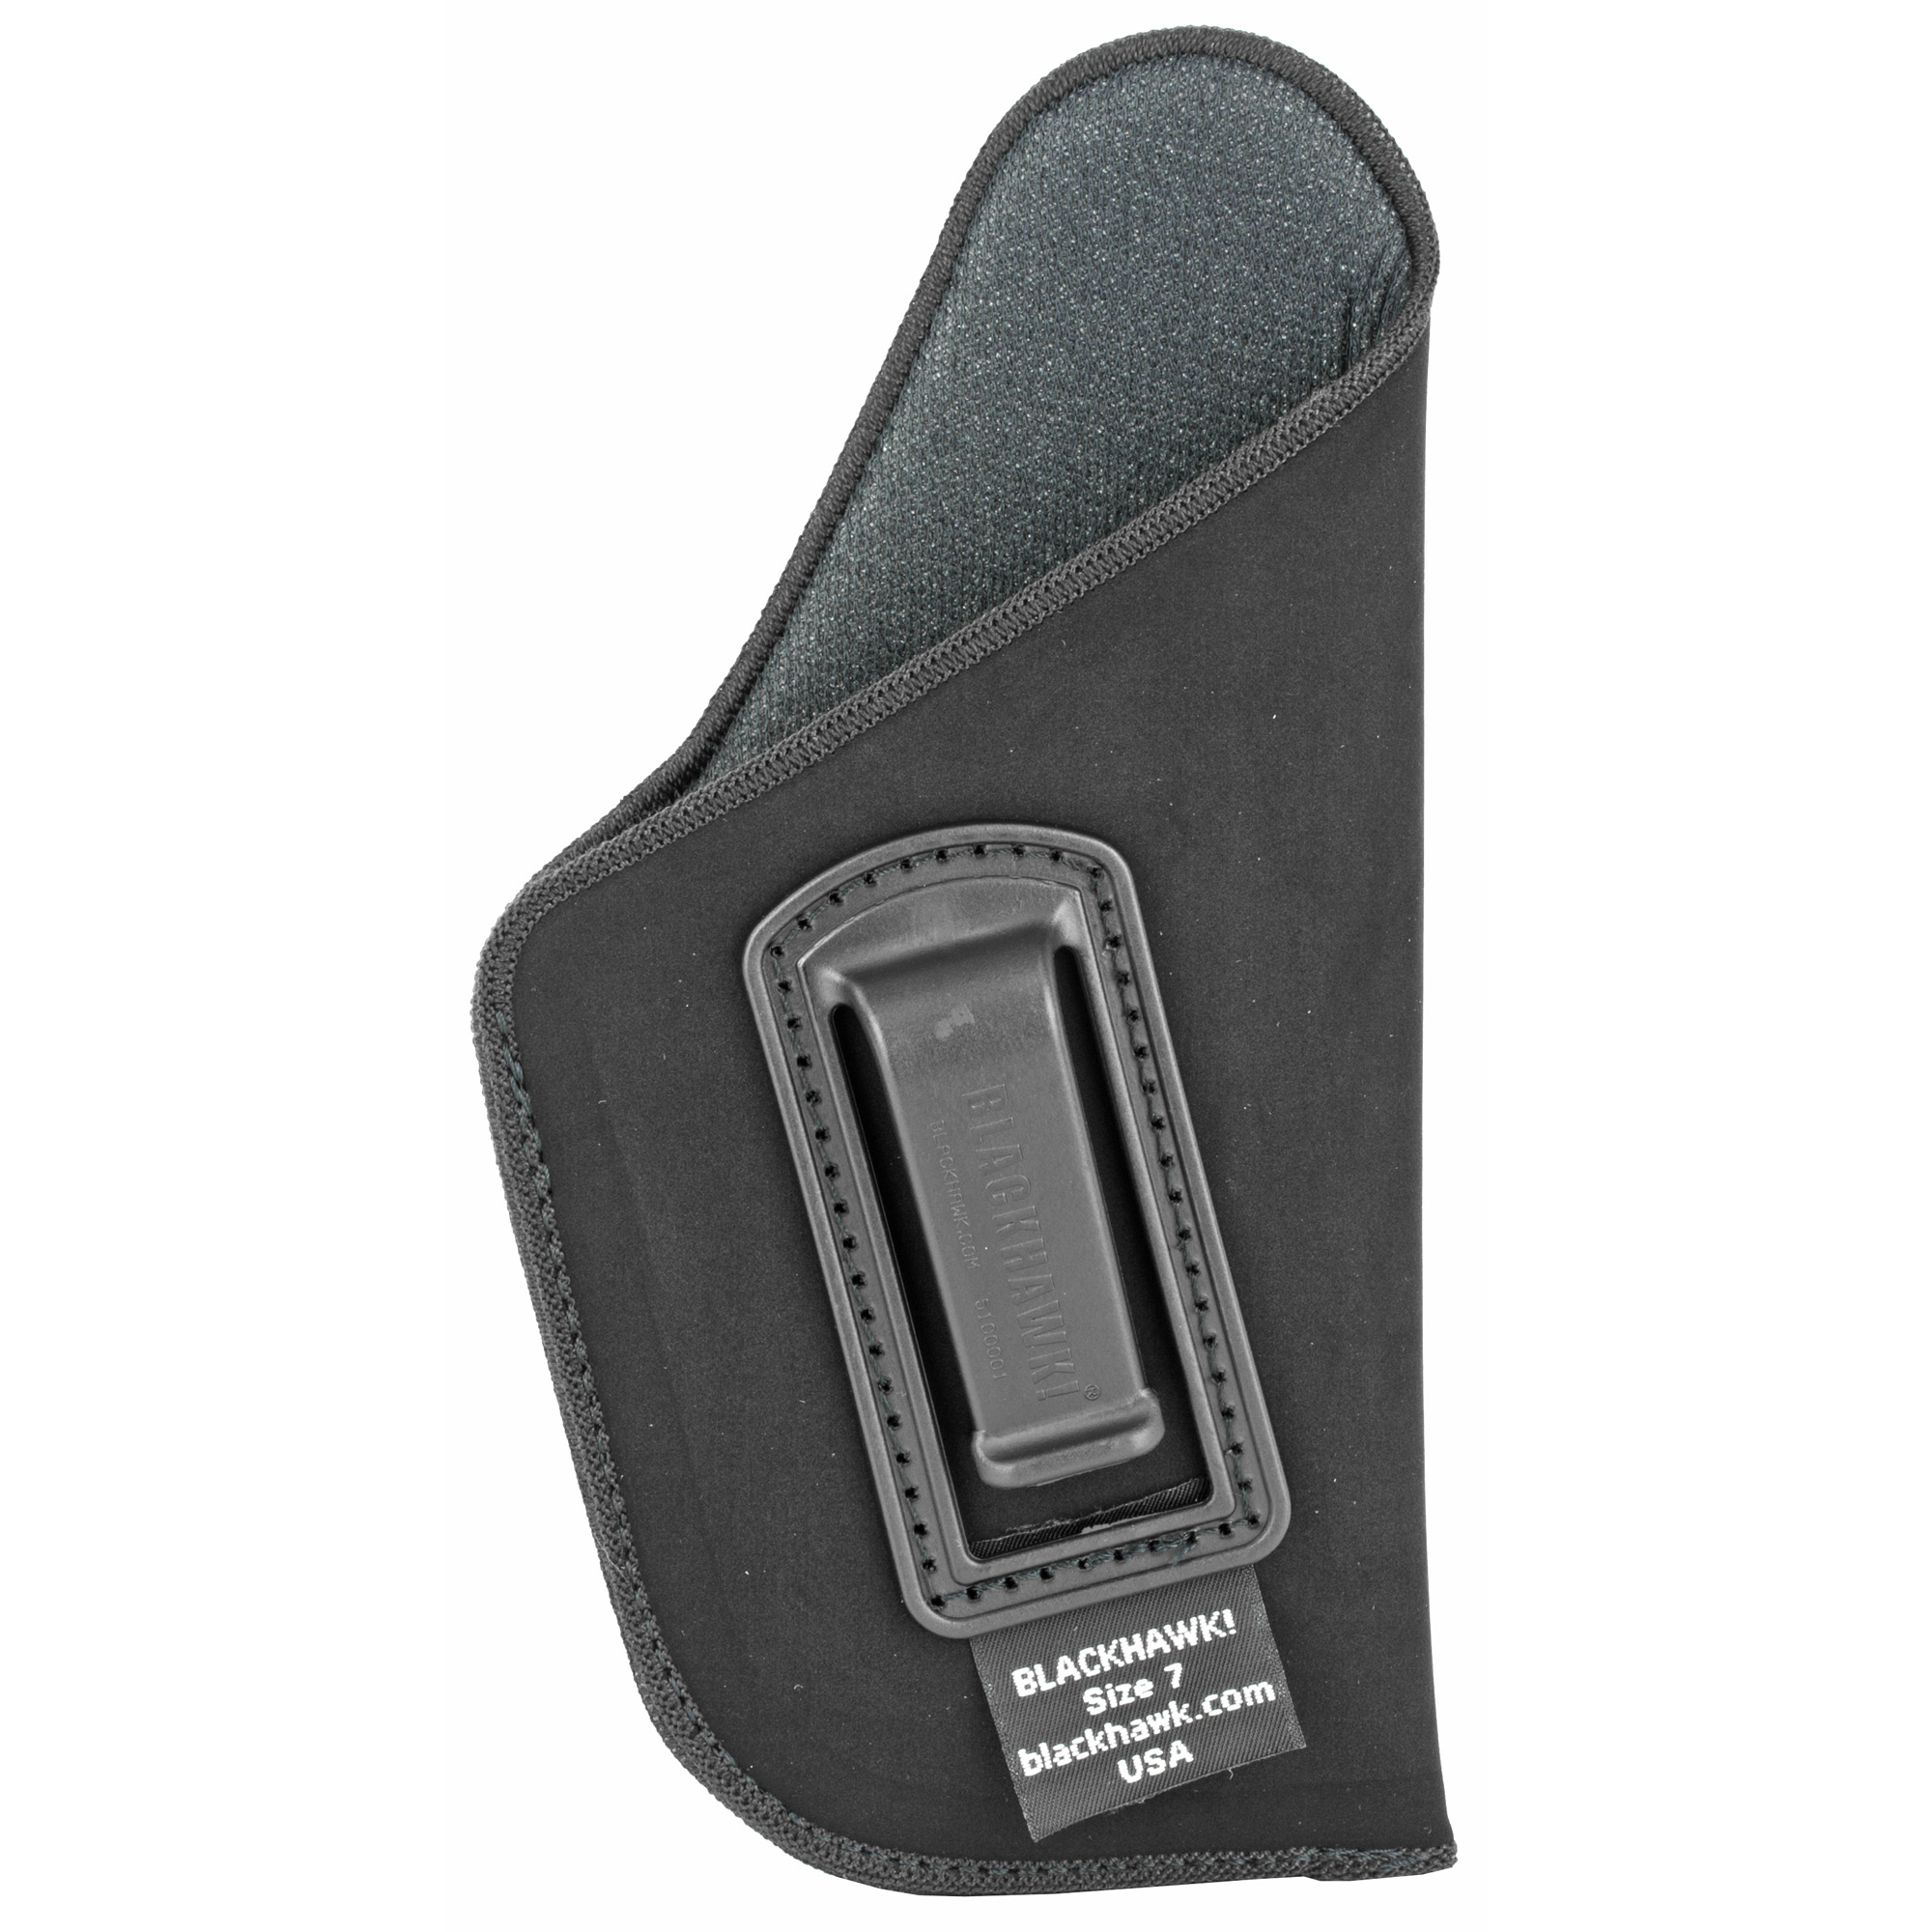 Blackhawk, Inside-the-Pants Holster, Size 7, Fits Large Pistol with 3. ...